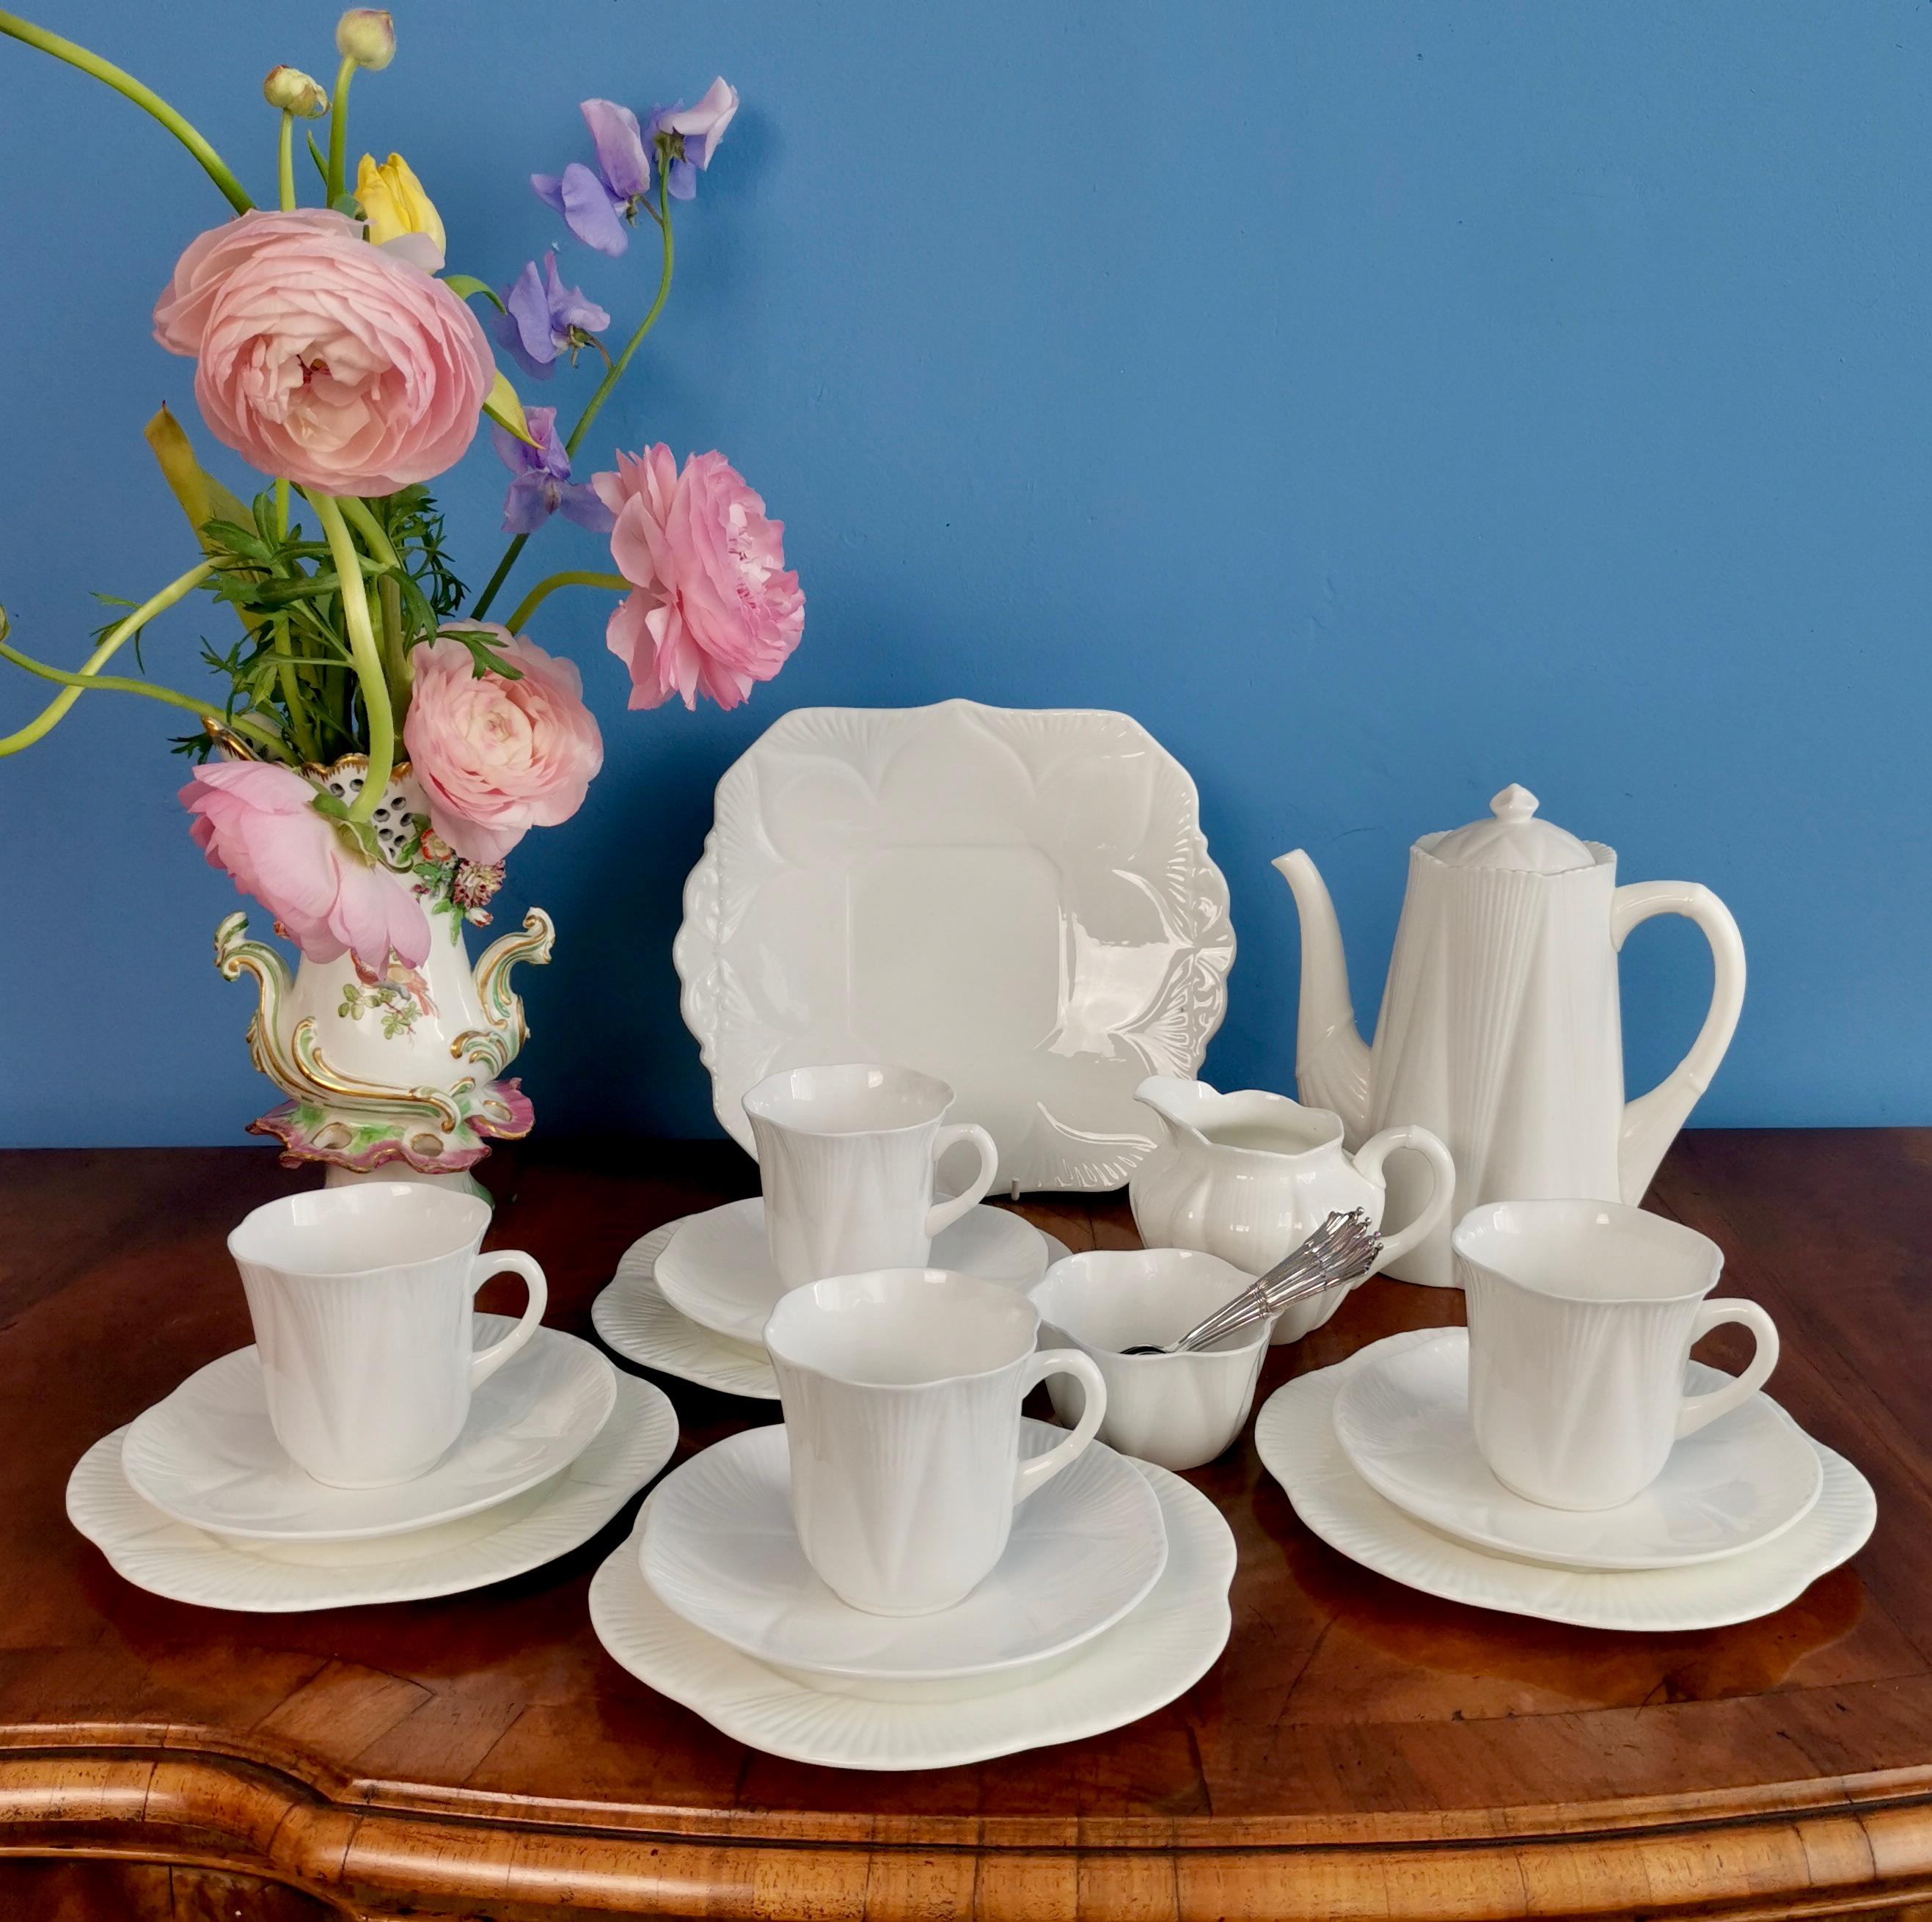 This is a charming coffee set for four in the very desired 